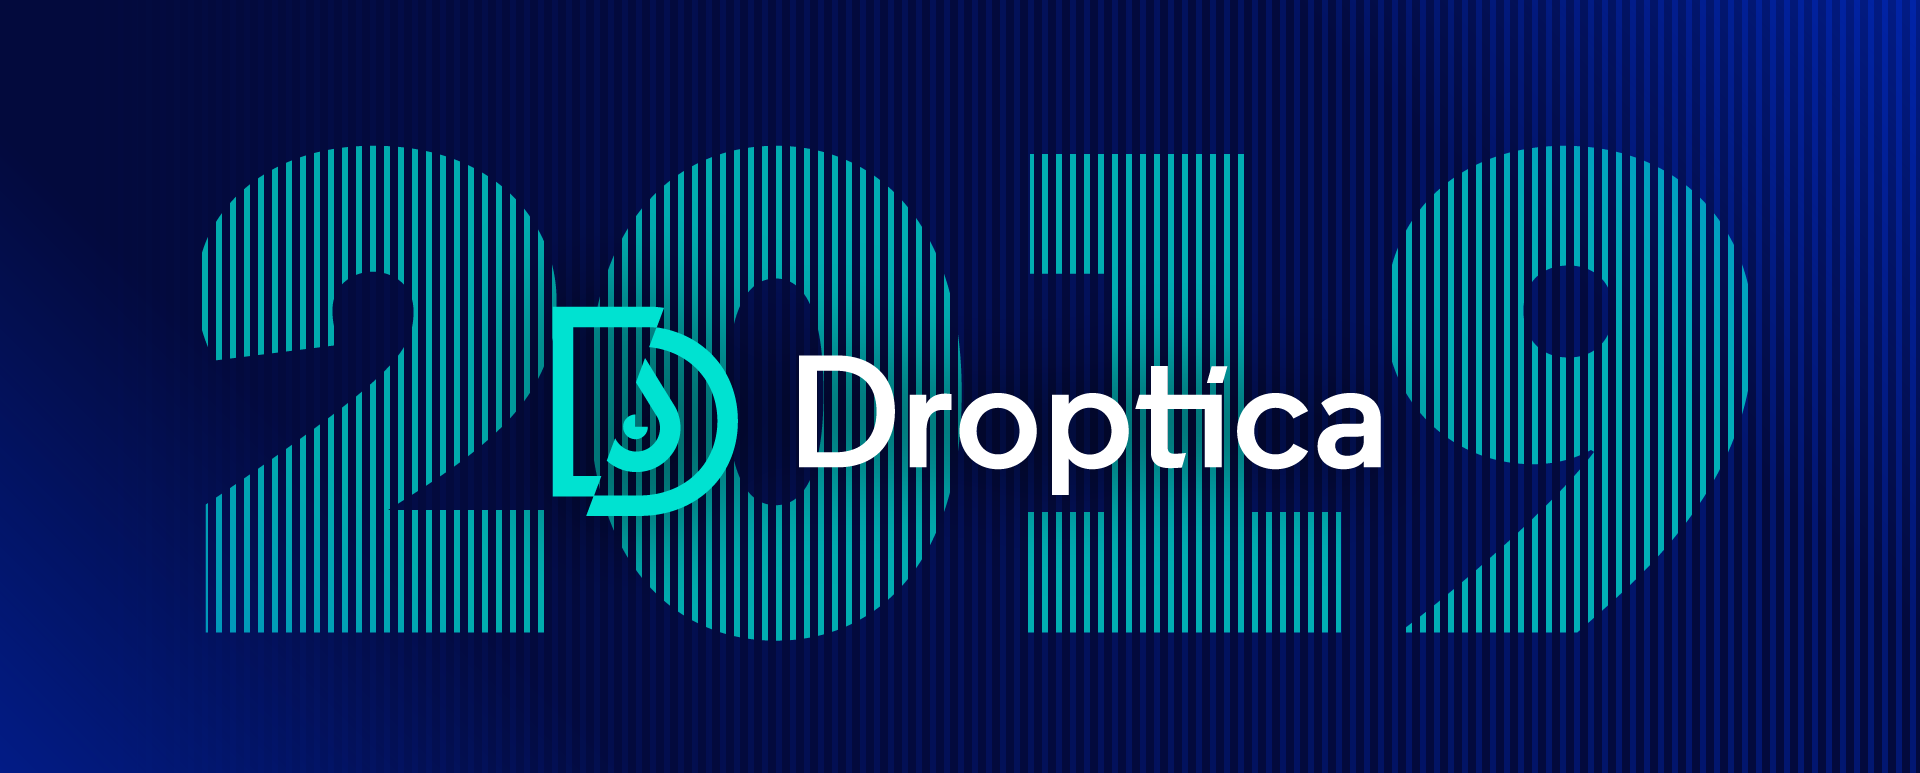 Droptica logo. In the background, there's "2019" text